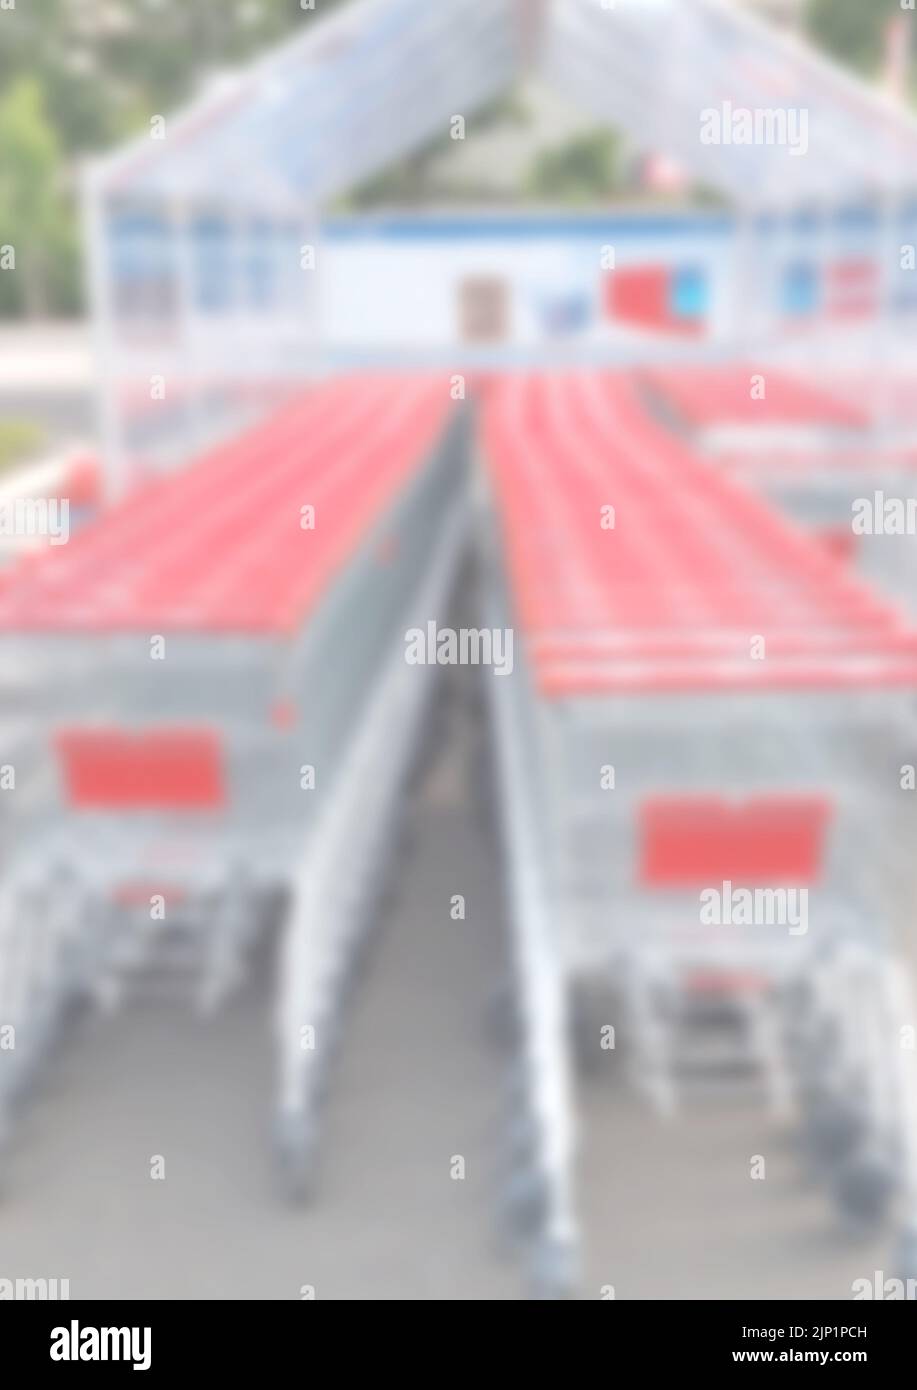 blurry background of row of shopping carts Stock Photo